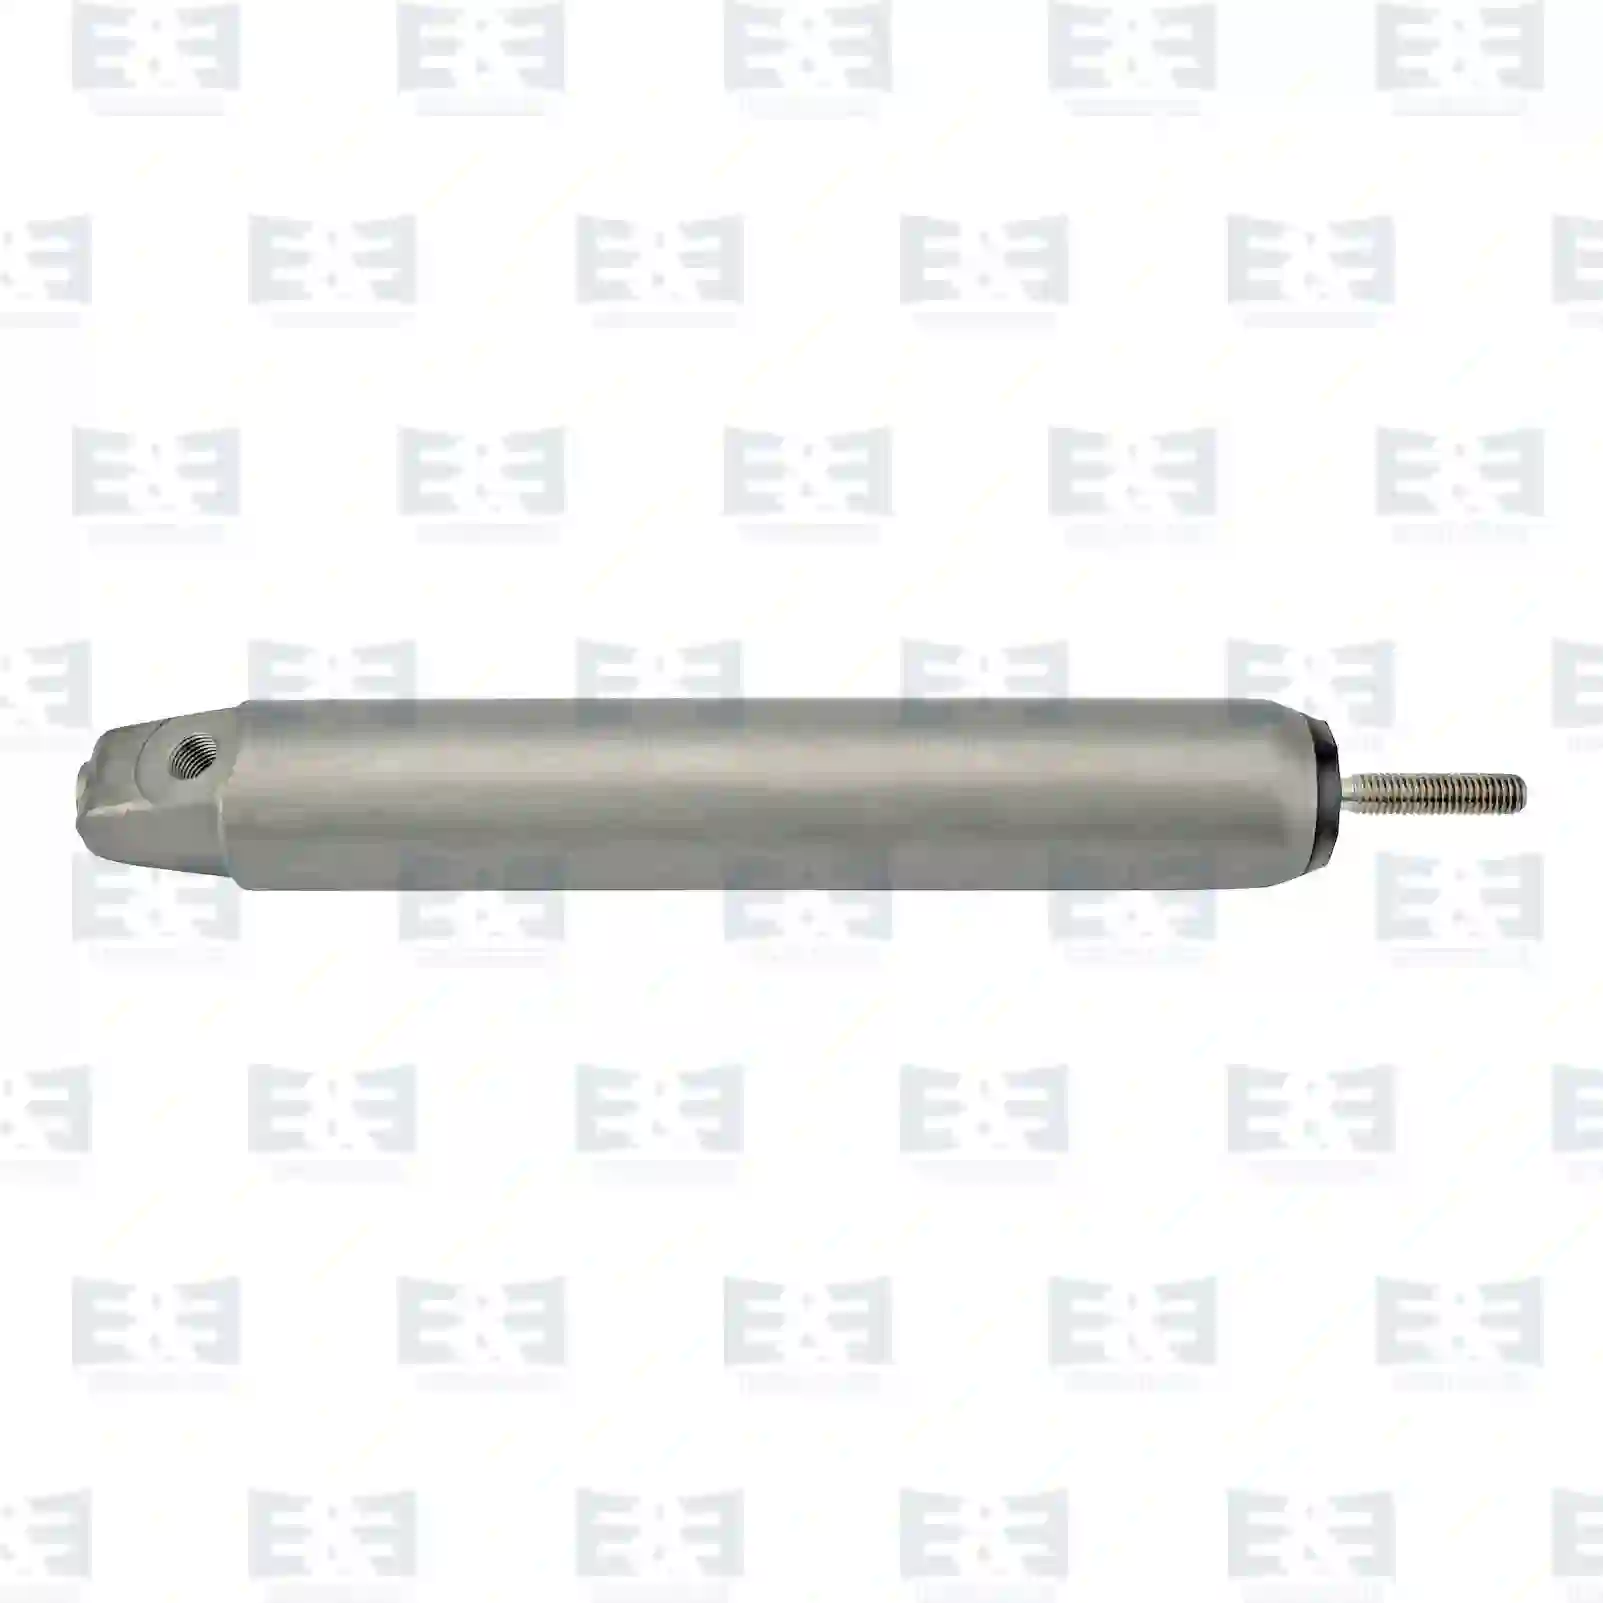 Exhaust Manifold Cylinder, exhaust brake, EE No 2E2200979 ,  oem no:81157016018, 81157016020, 81157016021, 81157016022, 81157016023, 81157016024, 81157016026, 81157016035, 81157016046, 81157016049, 81157016051, 81157016052, 81157016055, 81157016056, 81157016057, 81157016058, 81157016060, 81157016061, 81157016062, 81157016063, 81157016068, 81157016069, 81157016070, 81157016083, 81157016093, 81157016094, 81157016095, 81157016096 E&E Truck Spare Parts | Truck Spare Parts, Auotomotive Spare Parts